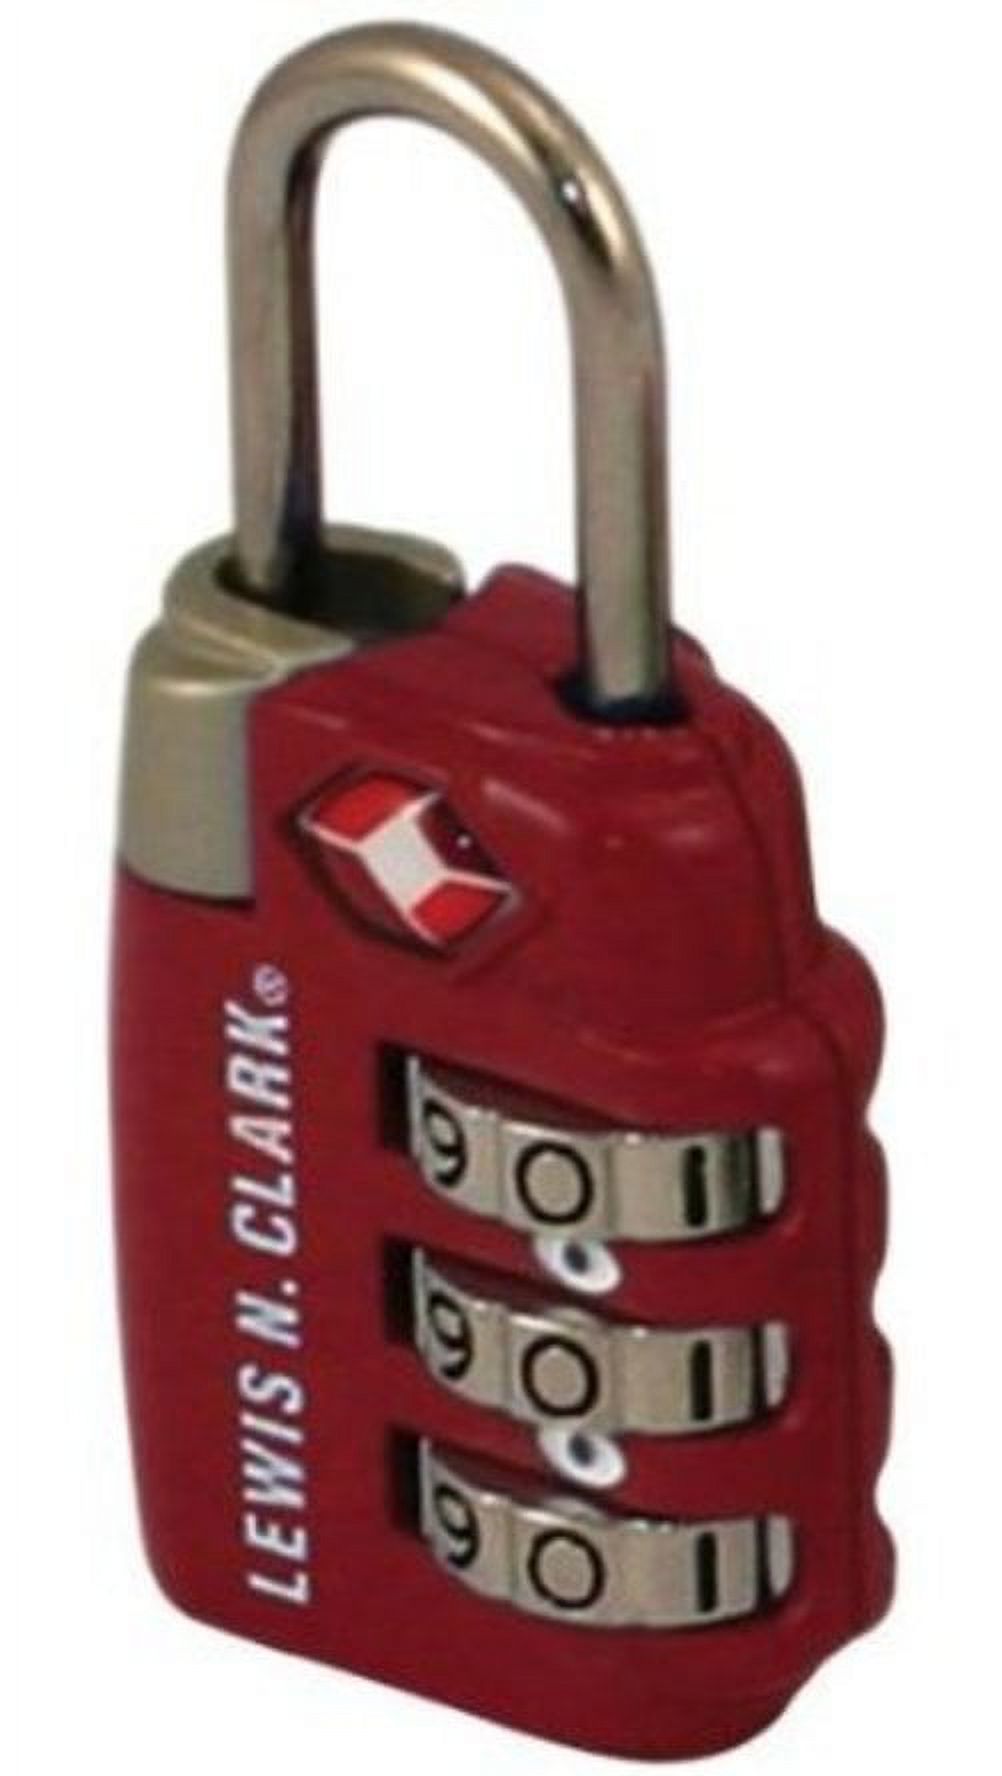 Travel Sentry Combination Lock, Red - image 1 of 6